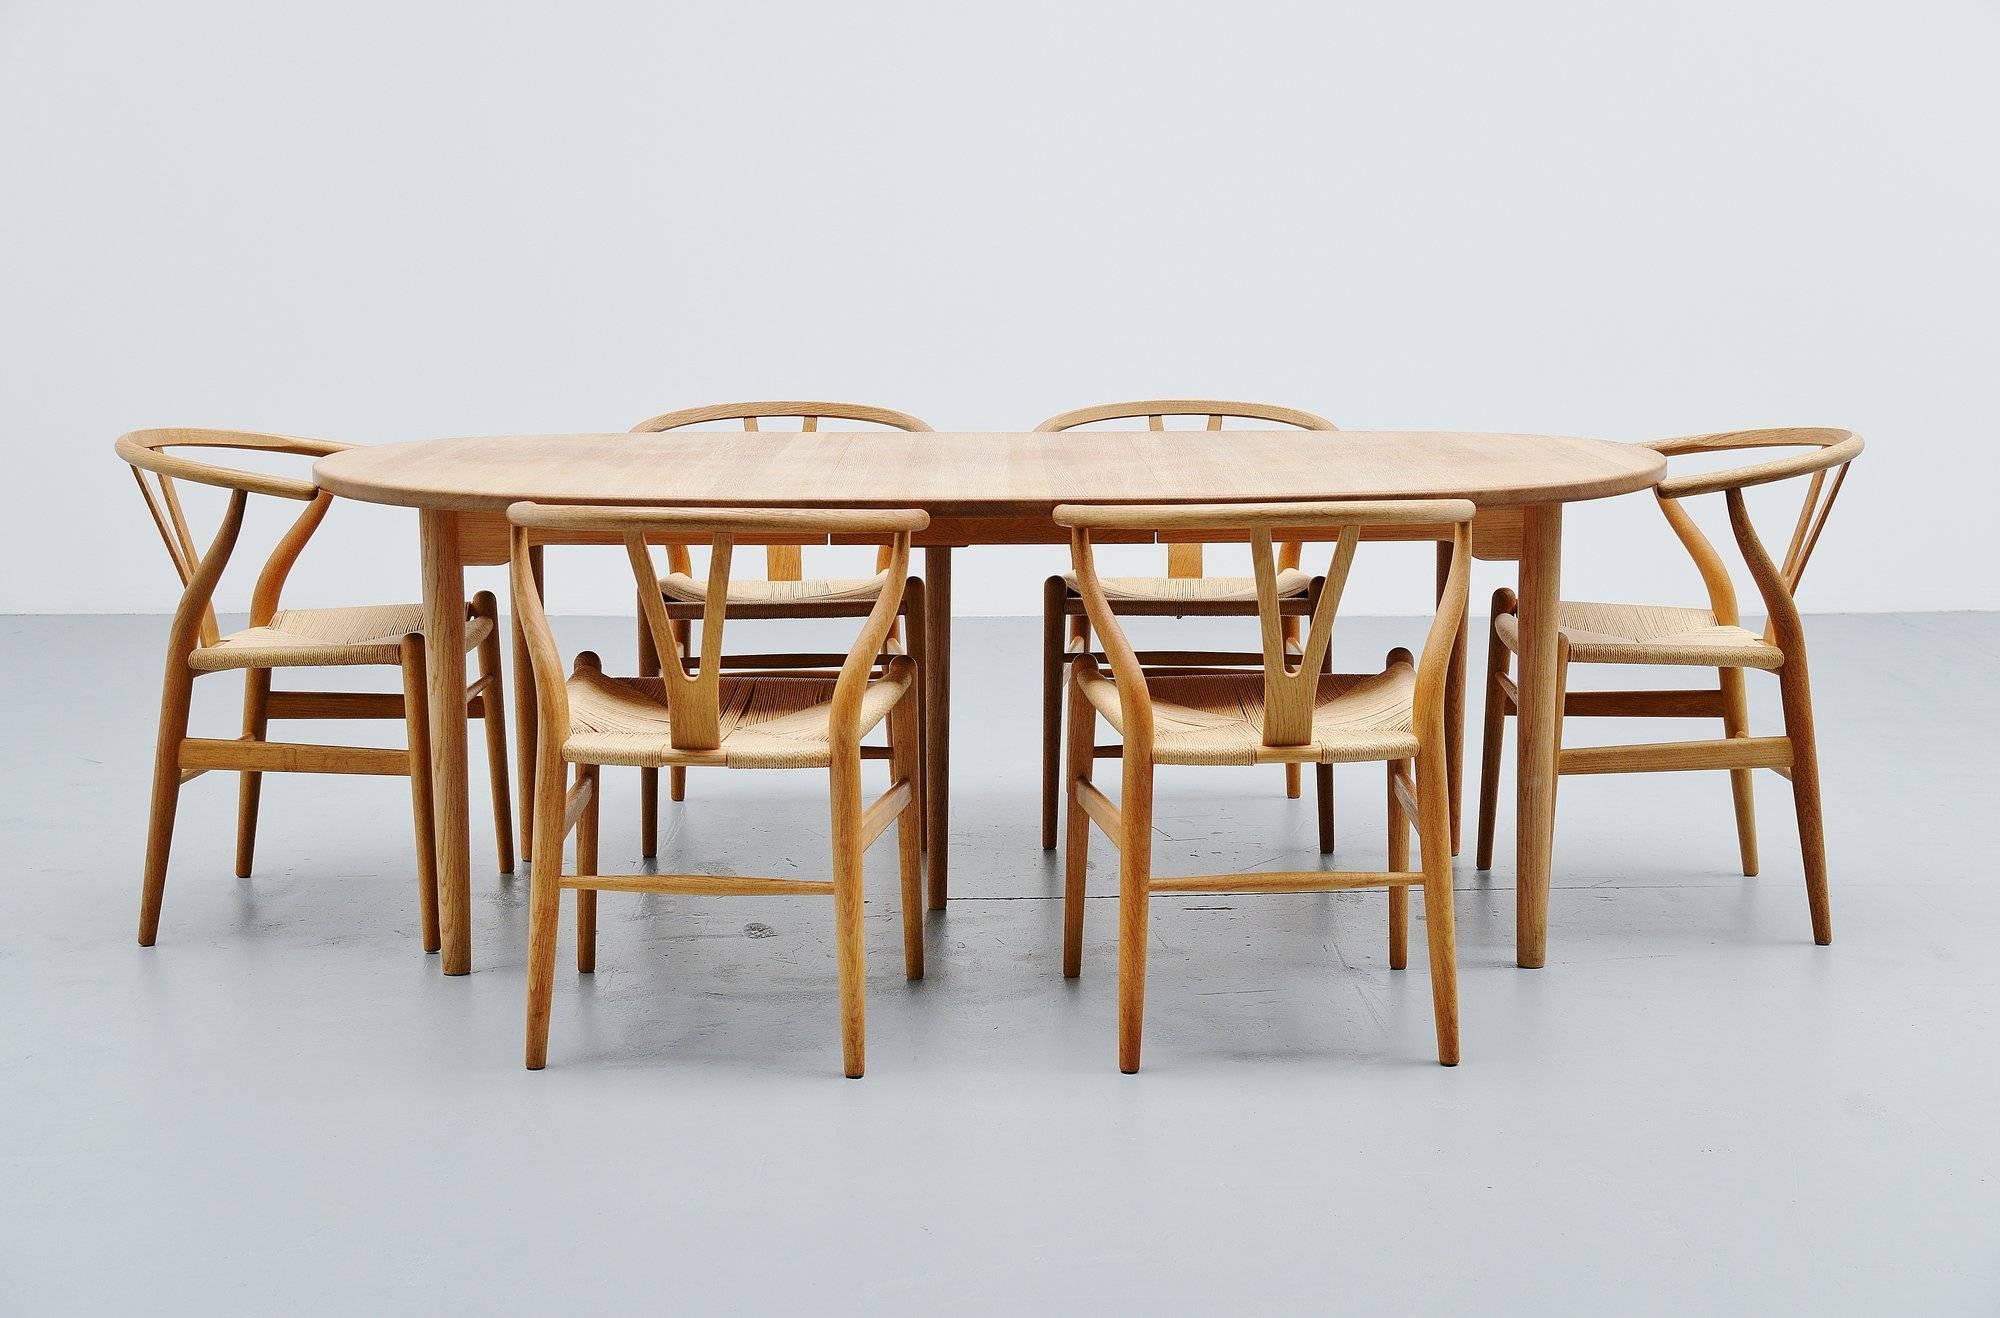 Very nice oval dining table designed and manufactured by Brdr. Andersen Møbelsnedkeri, Denmark, 1970. This table is made of solid oak, treated with soap. The maintenance box with soap and instructions is included with the table. The table has one